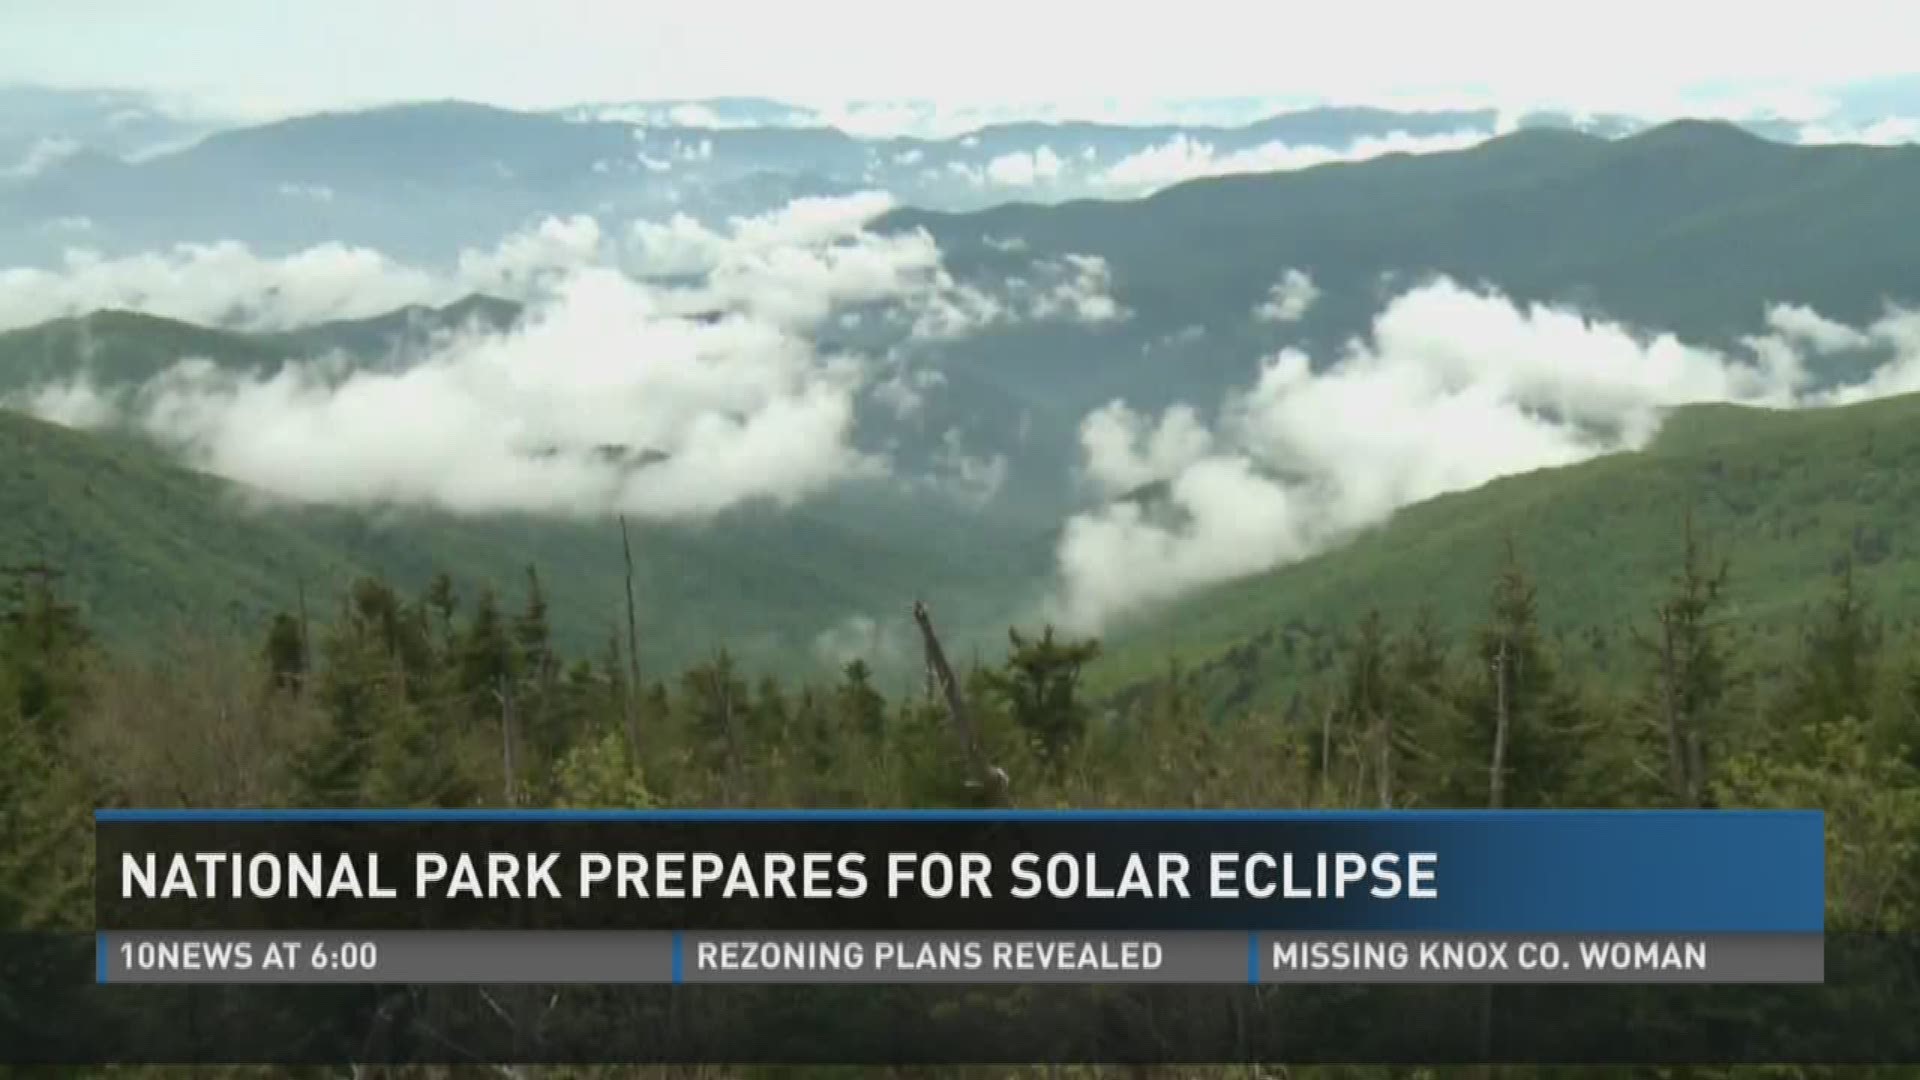 Feb. 27, 2017: In less than six months, parts of East Tennessee will have some of the best viewing spots in the world for a total solar eclipse. Great Smoky Mountains National Park is giving people the chance to view it in a unique way.